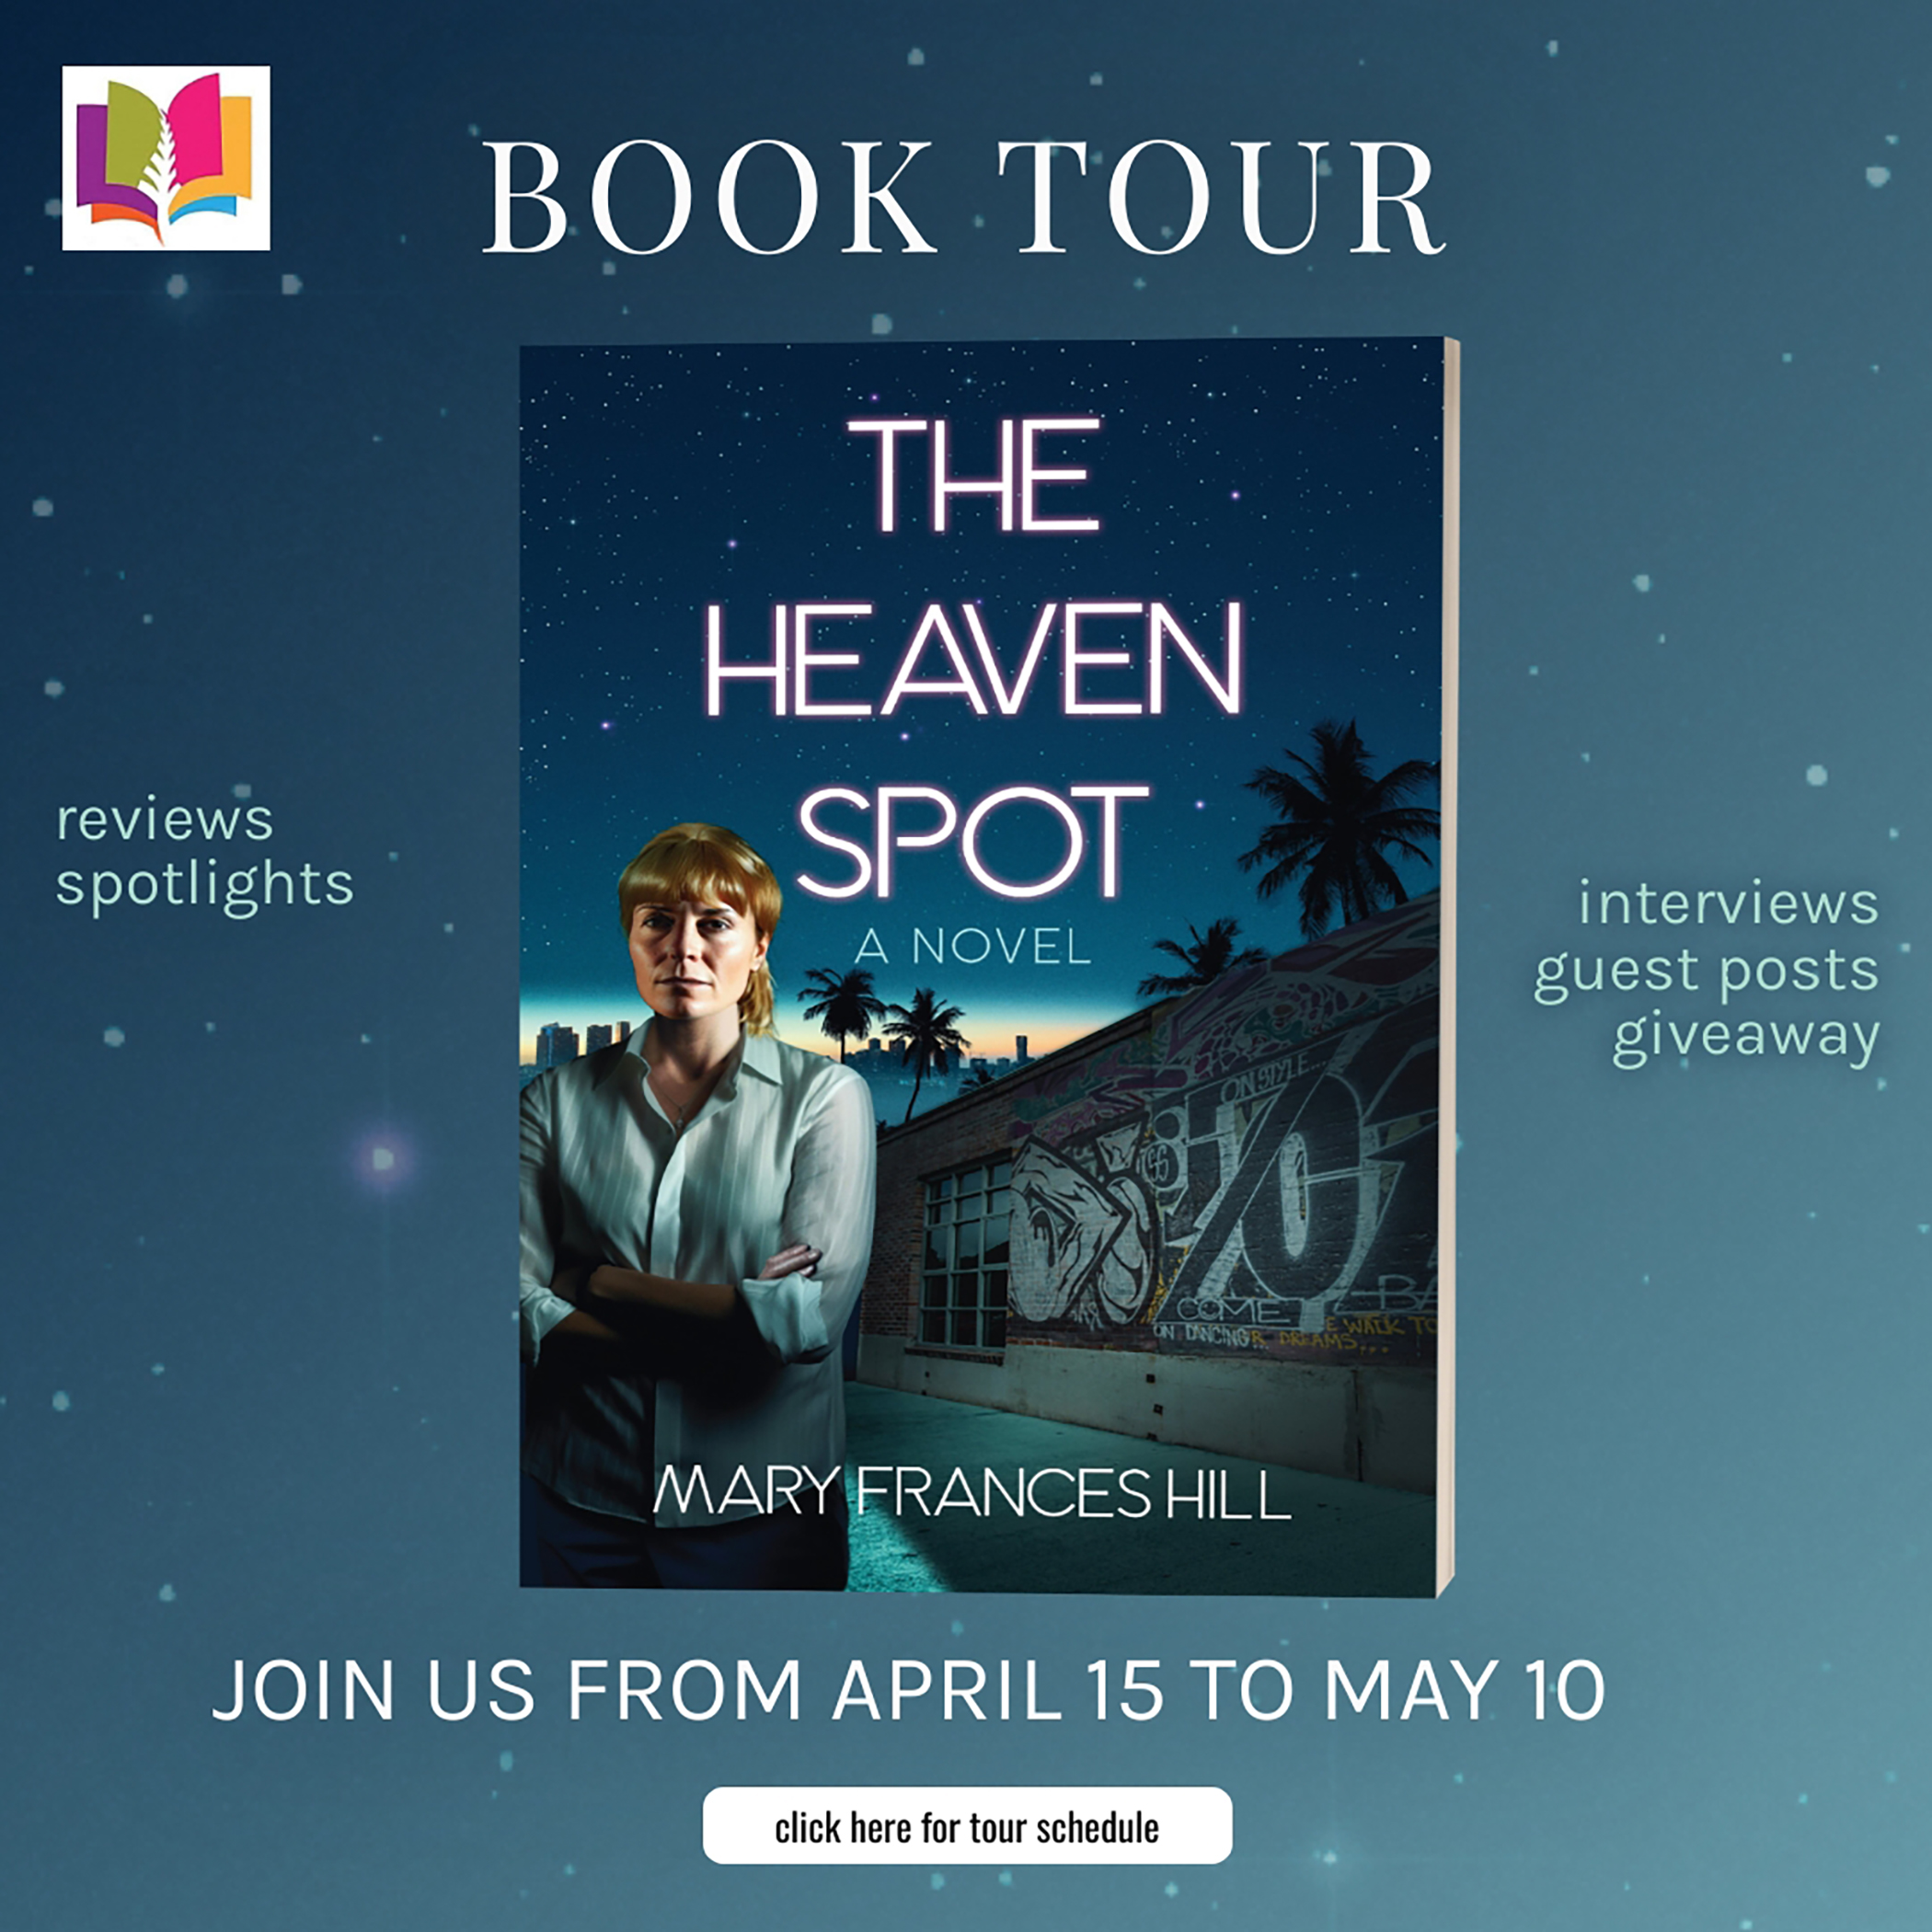 Book Review: The Heaven Spot by Mary Frances Hill | 1 Signed Copy Available | #Mystery #Thriller #Addiction #Family